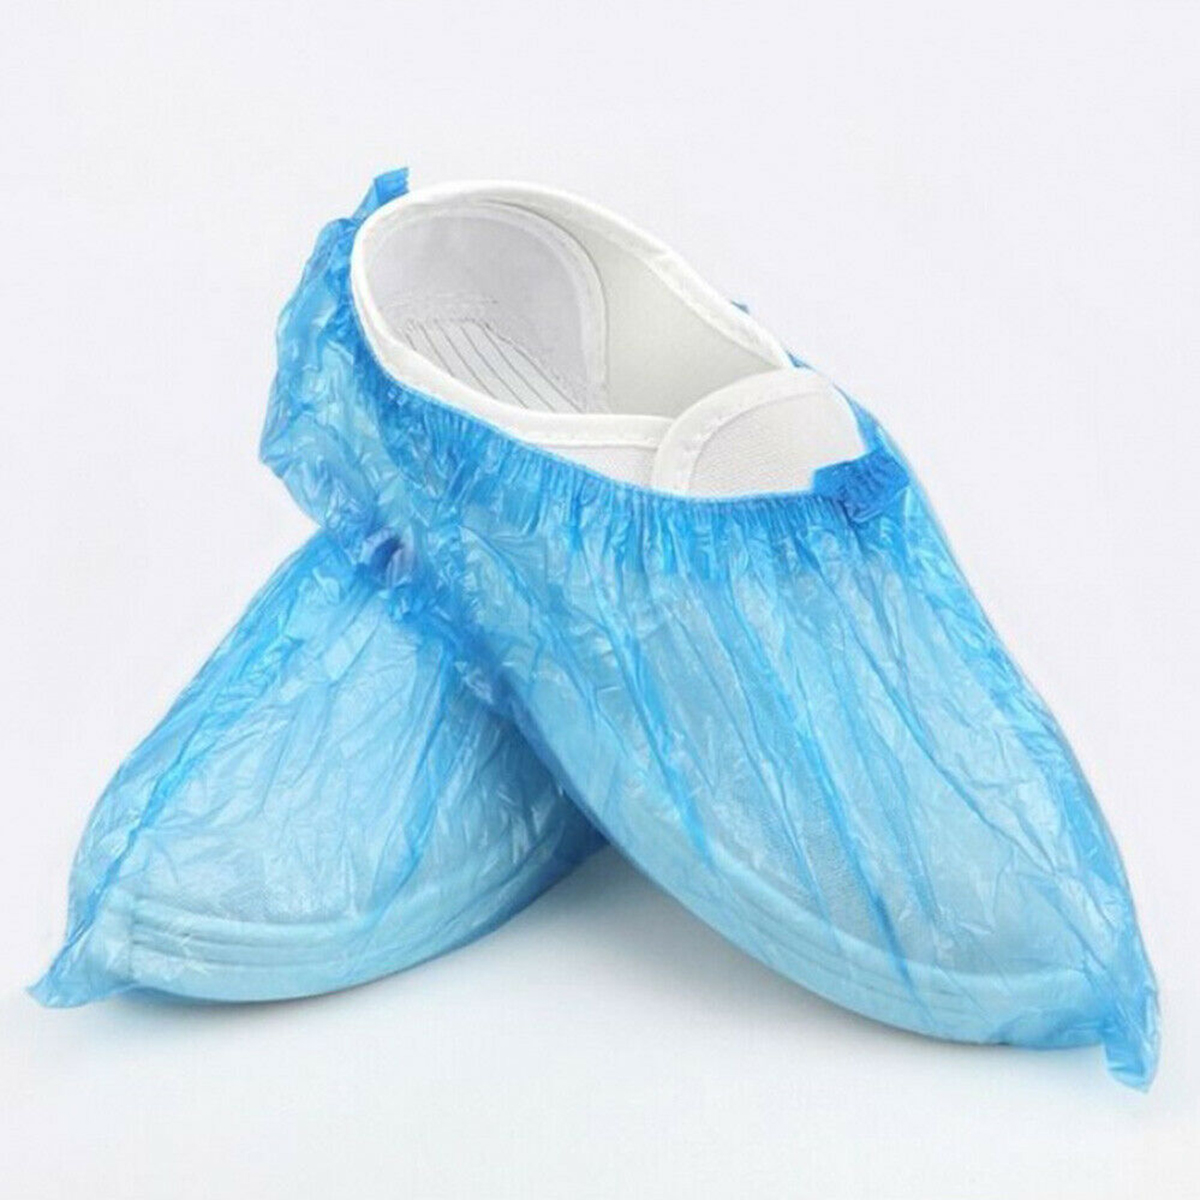 89 Sports Cleaning plastic shoes for Mens